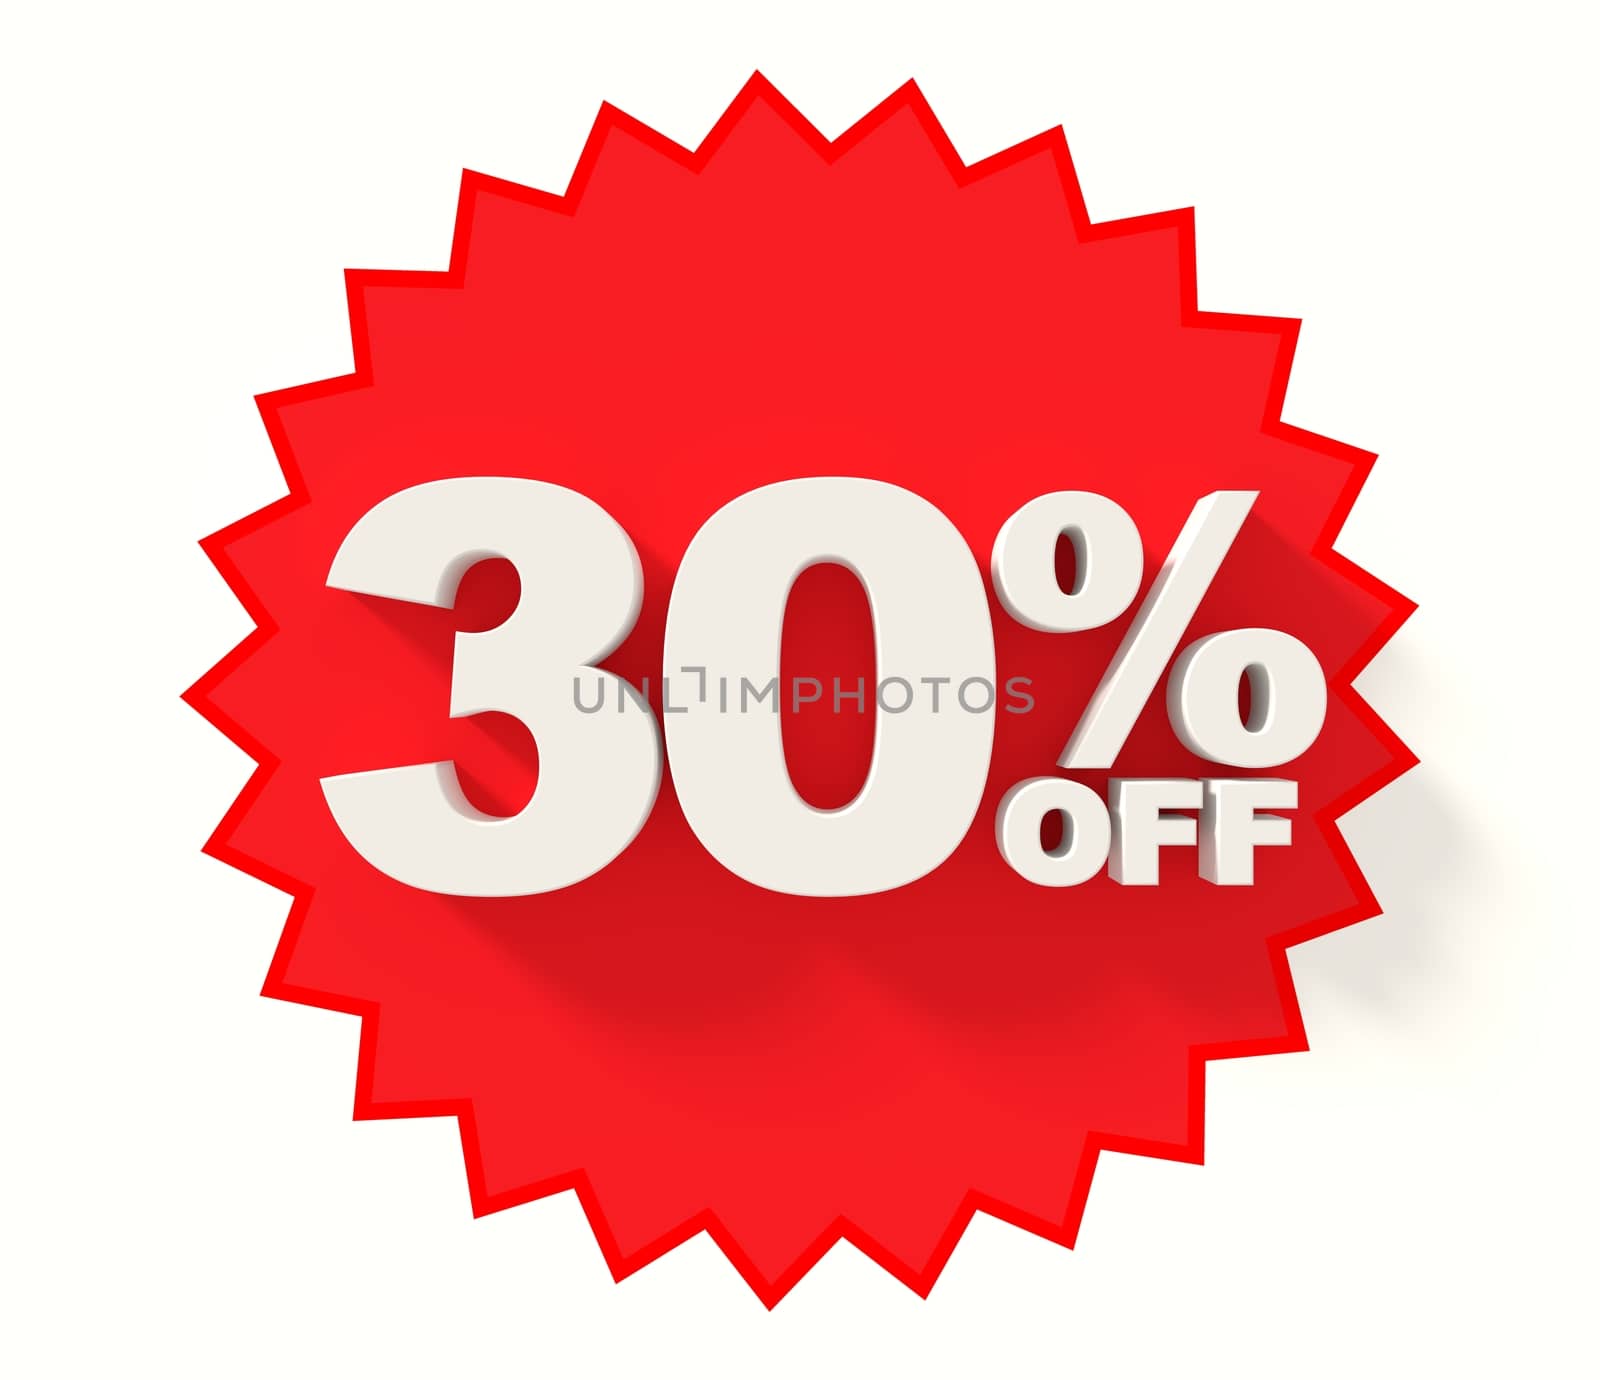 Red star with 30% sale sign by Barbraford